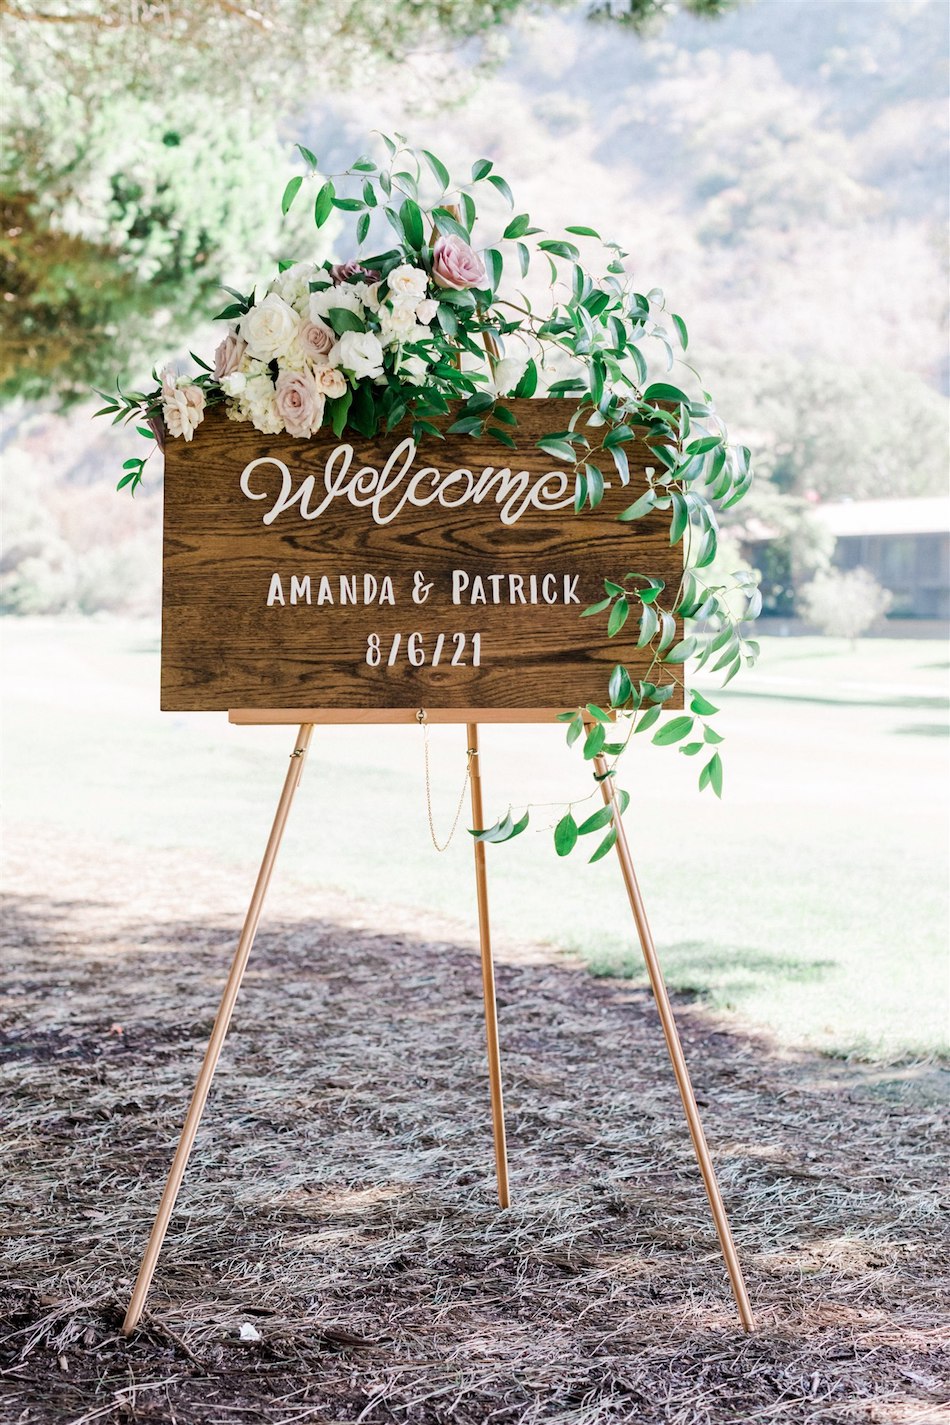 welcome sign, signage, floral-filled sign, floral design, florist, wedding florist, wedding flowers, orange county weddings, orange county wedding florist, orange county florist, orange county floral design, flowers by cina